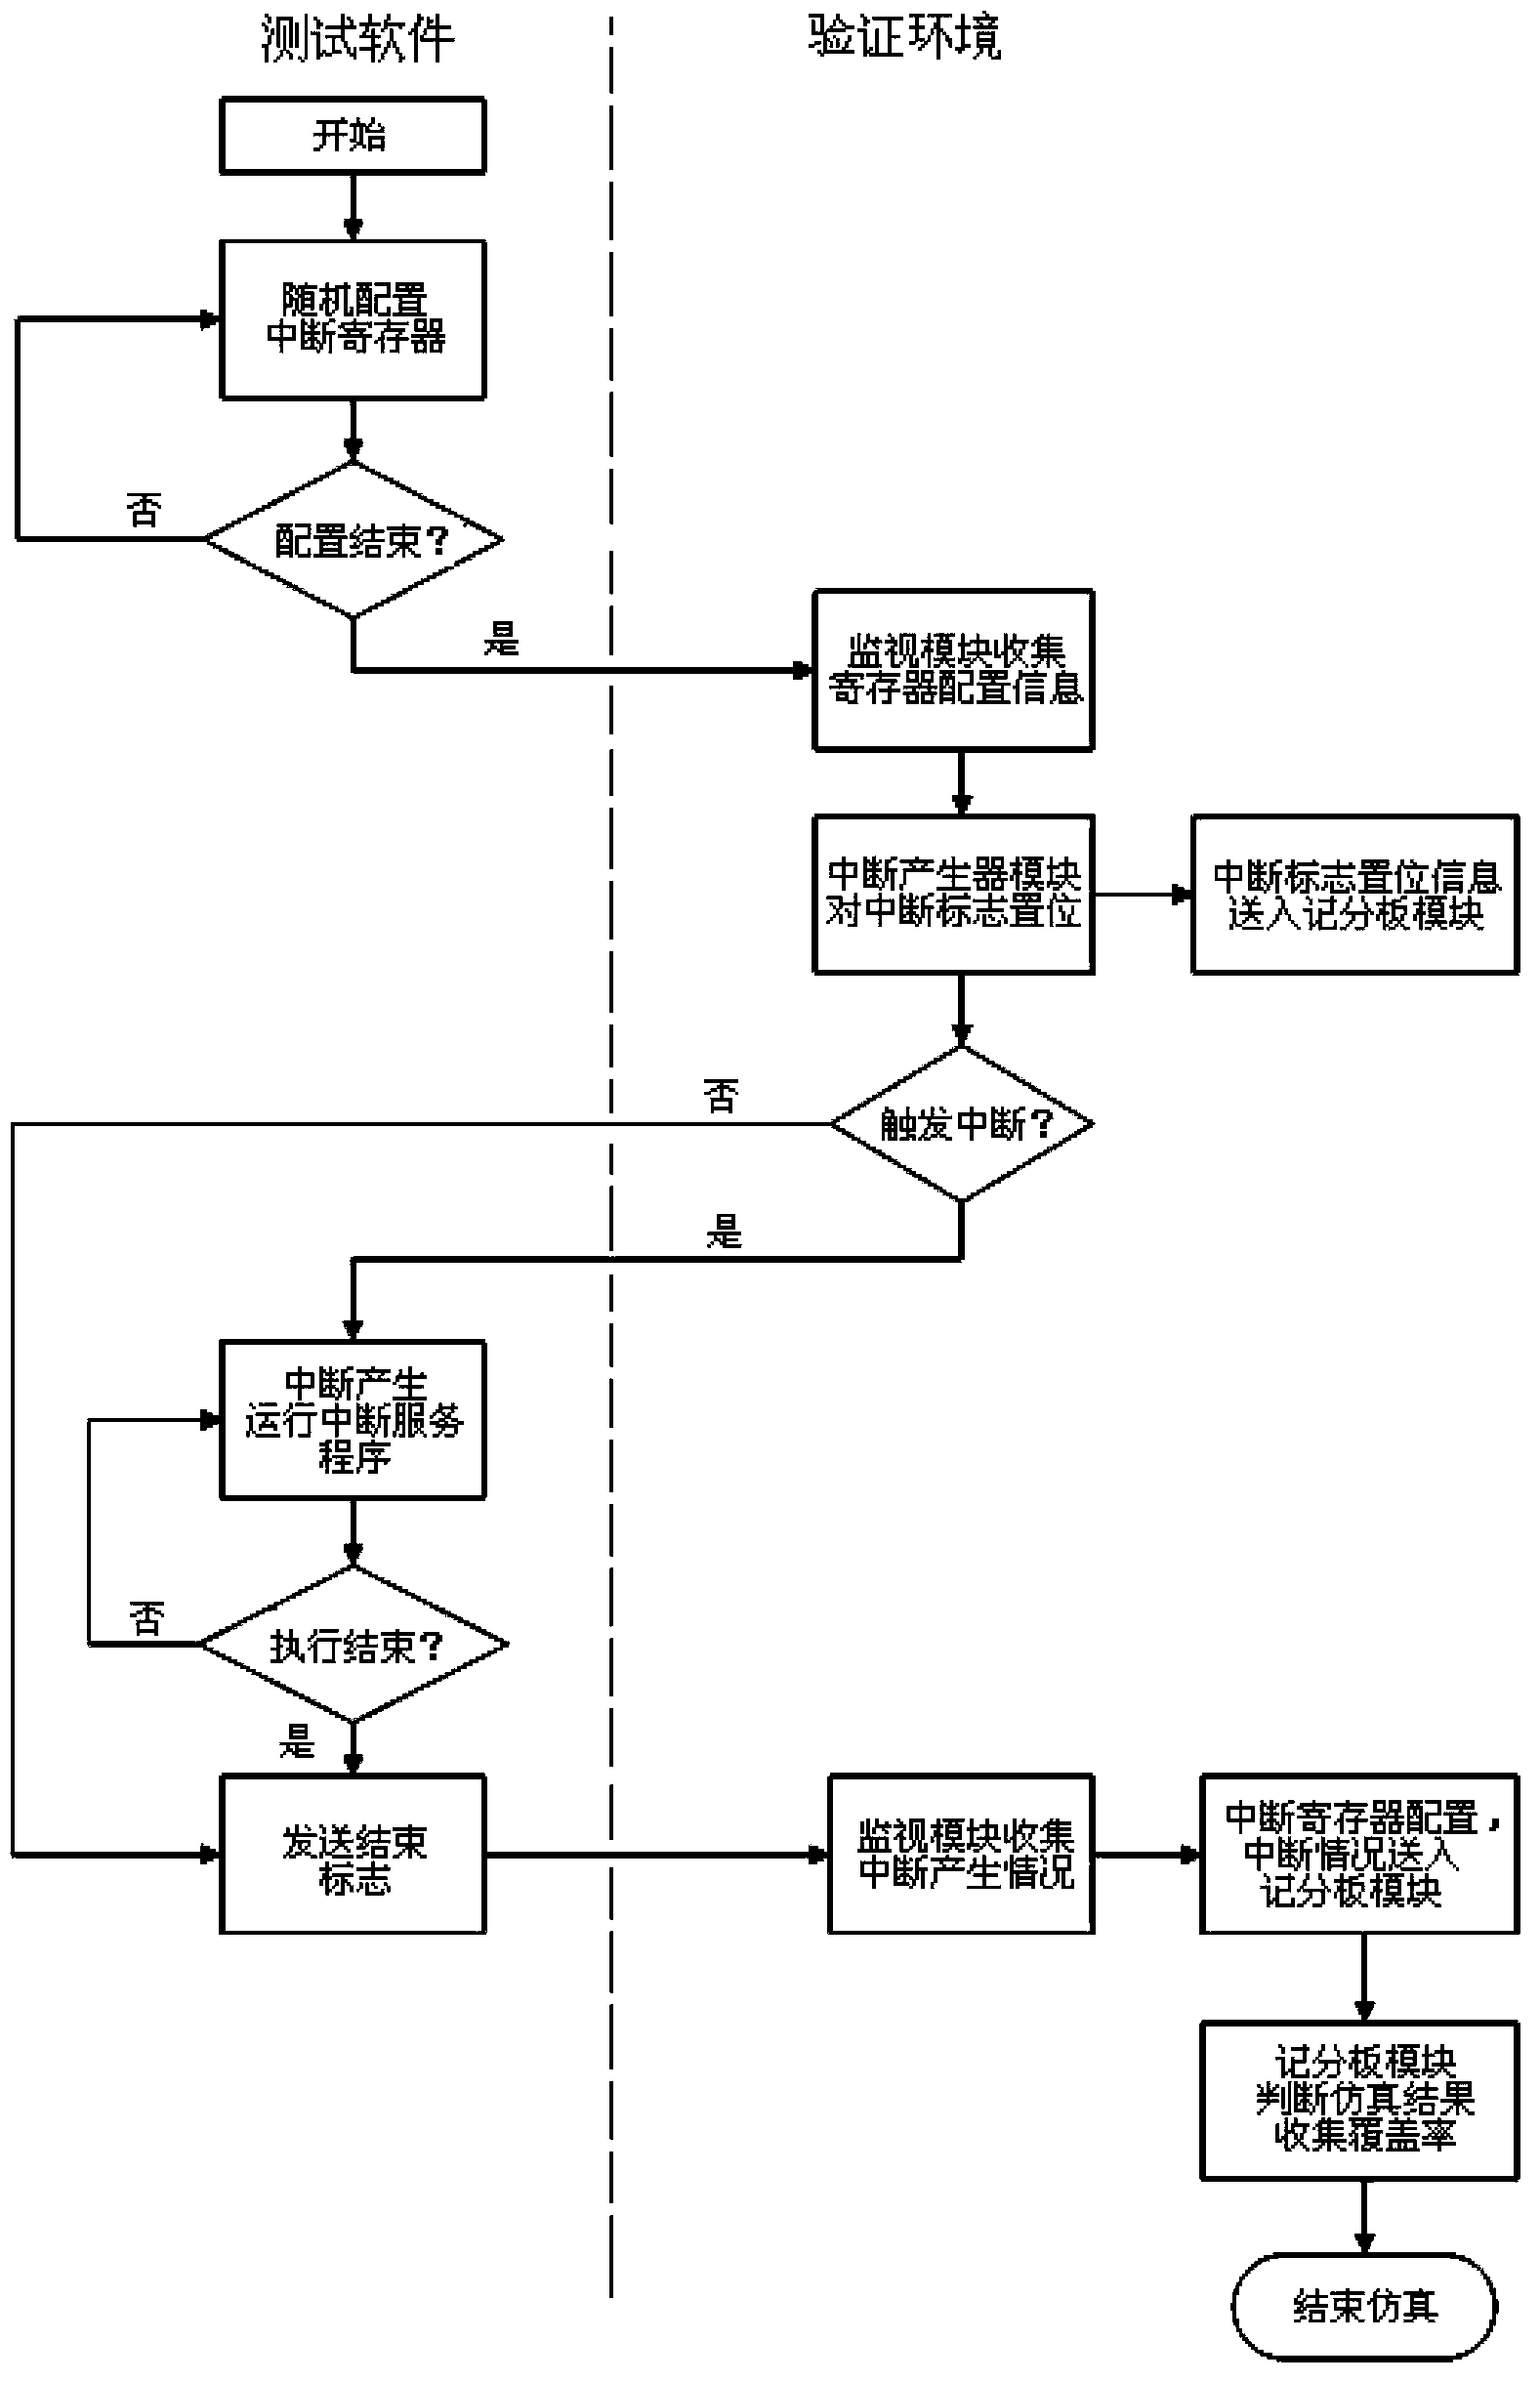 Simulation verification system and method for interrupt controller of hard-core MCU